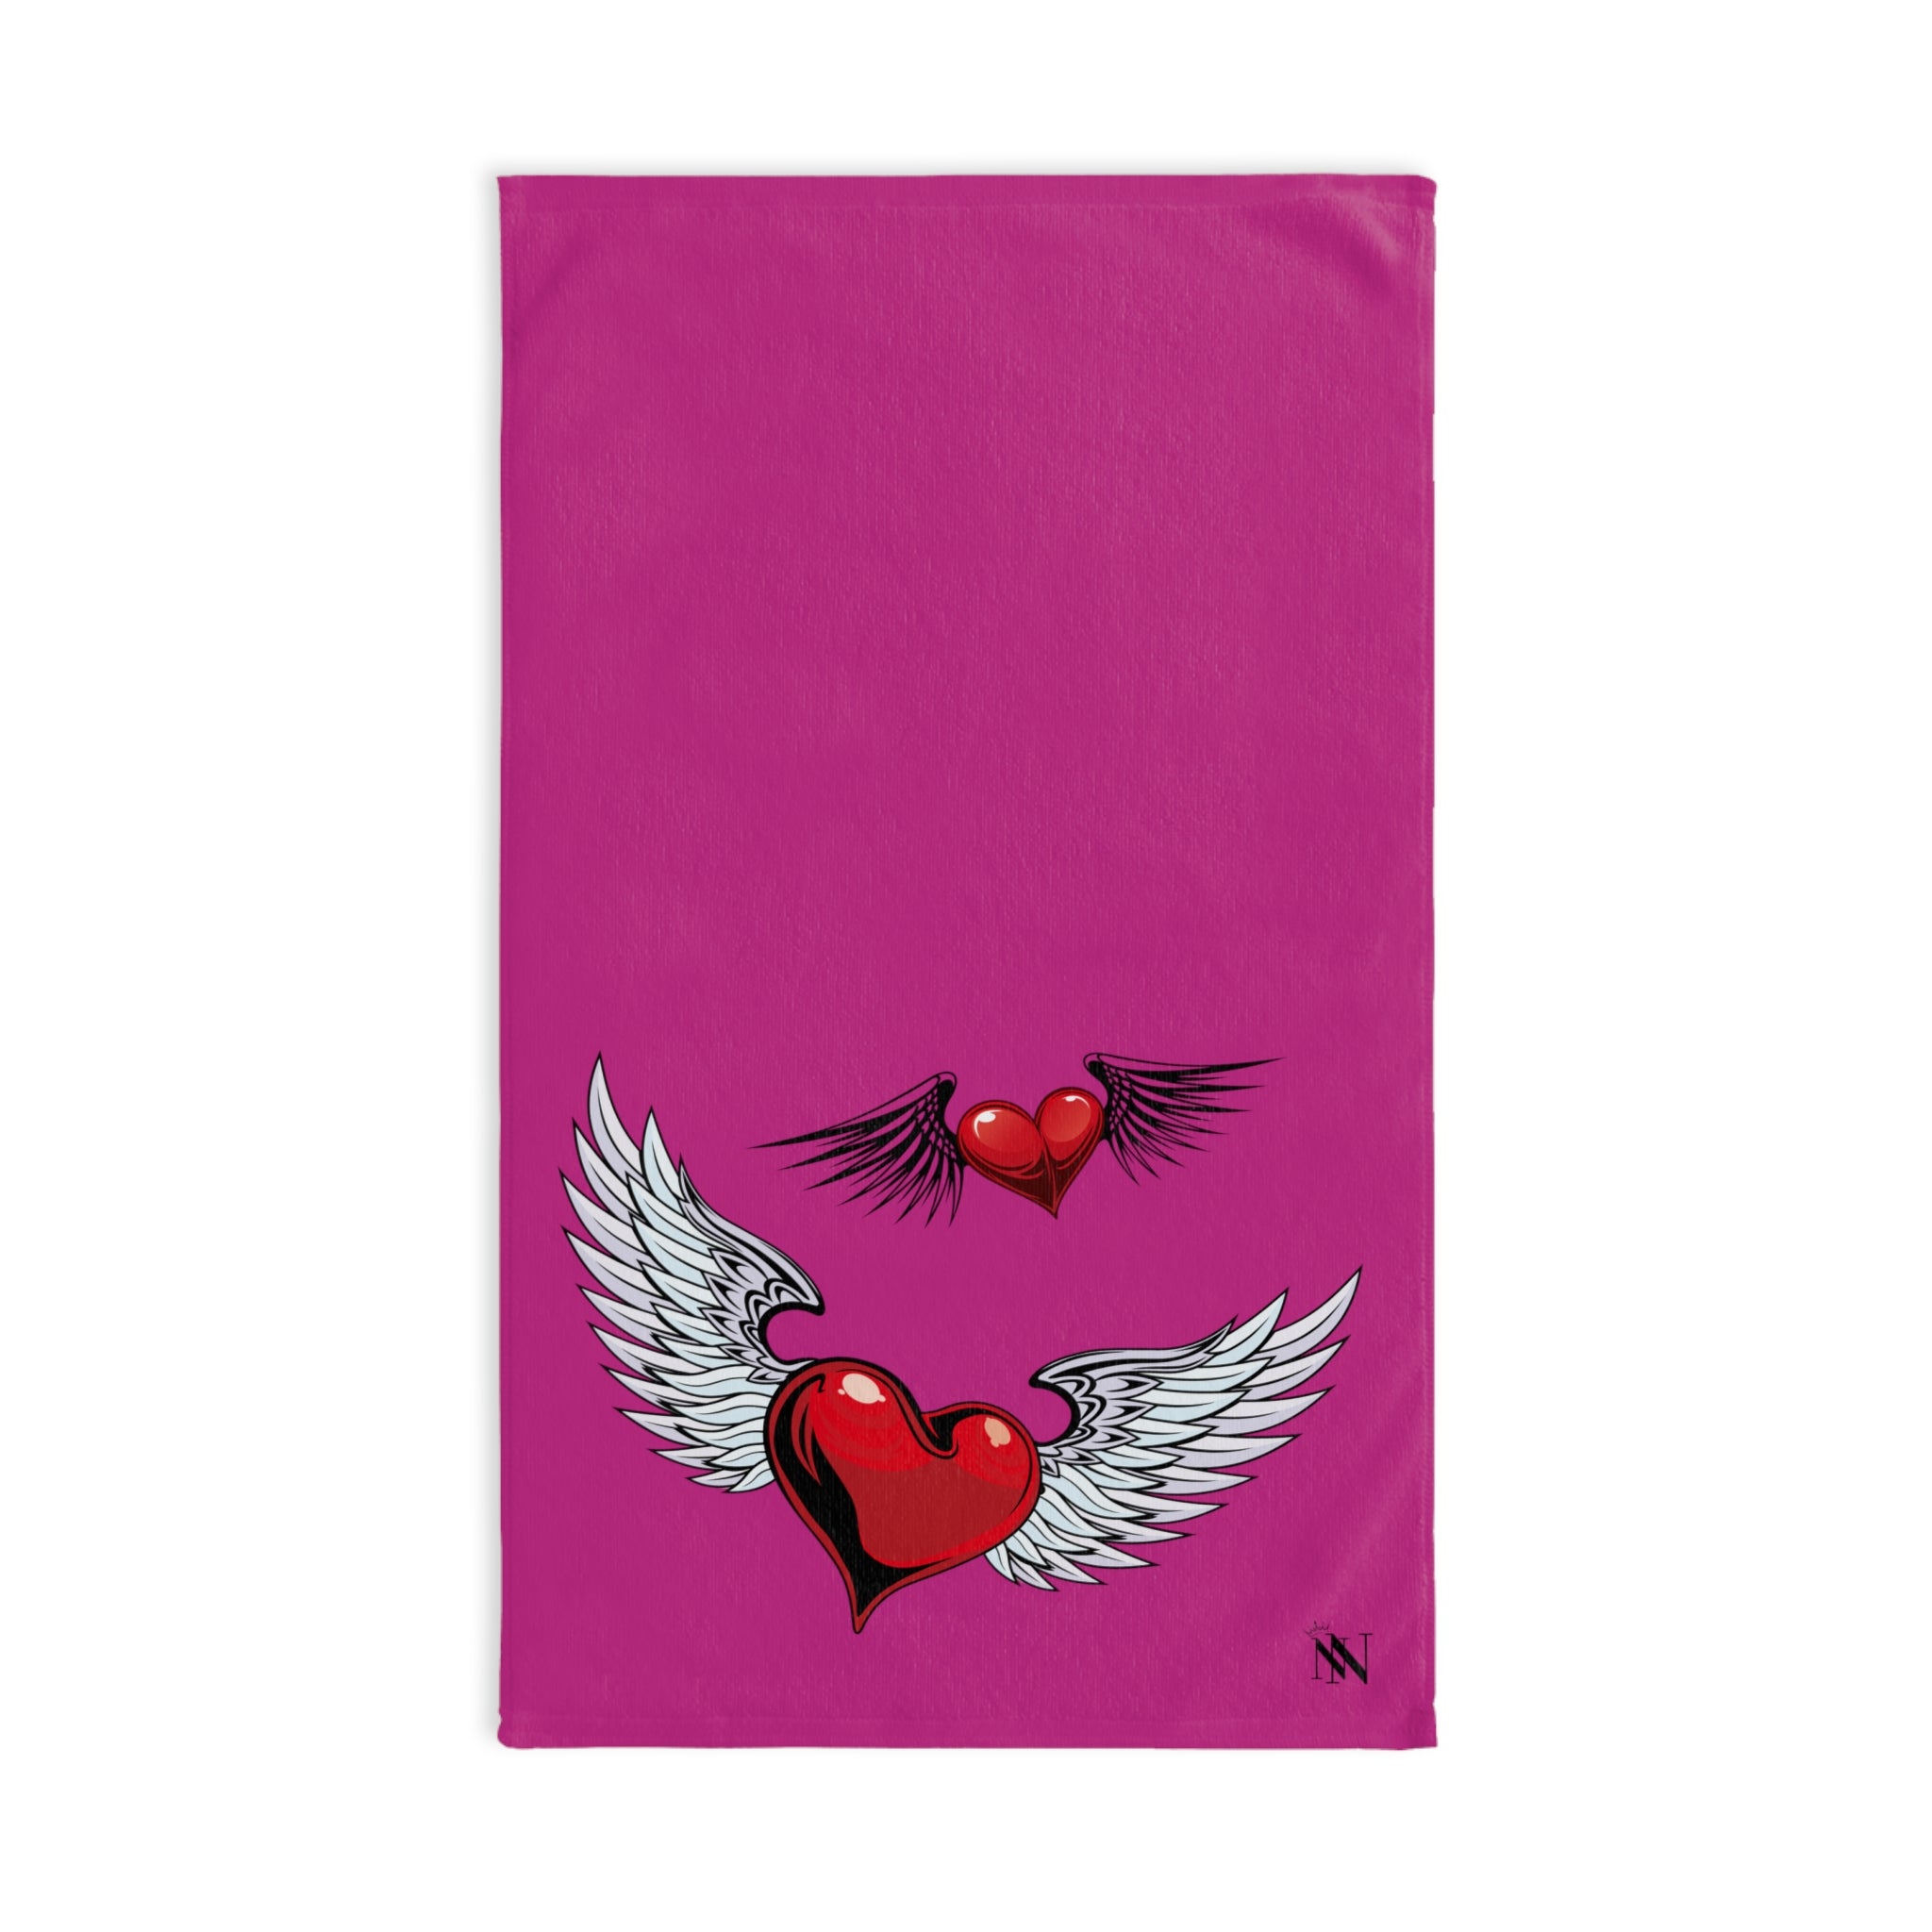 Twin Wing Heart Fuscia | Funny Gifts for Men - Gifts for Him - Birthday Gifts for Men, Him, Husband, Boyfriend, New Couple Gifts, Fathers & Valentines Day Gifts, Hand Towels NECTAR NAPKINS